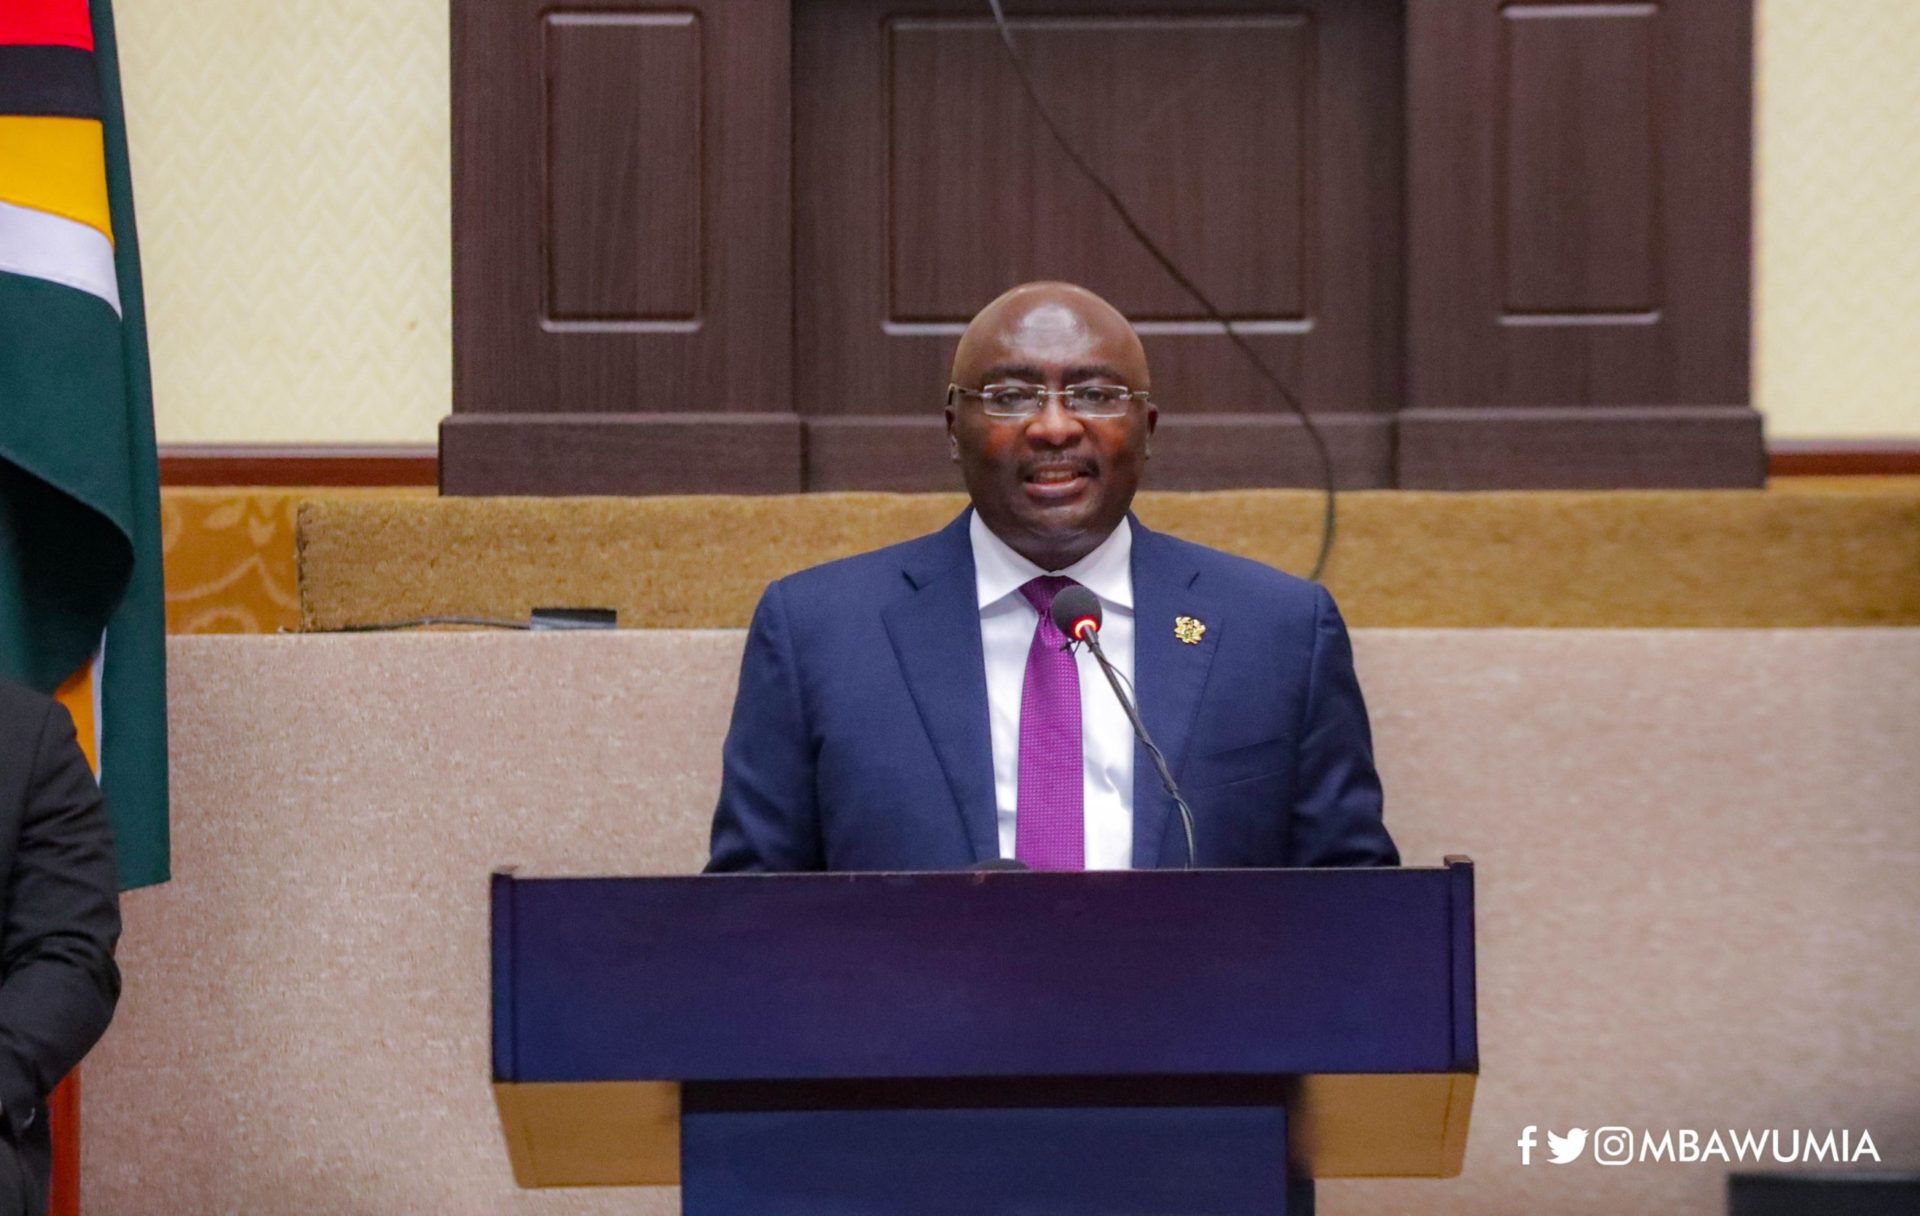  Bawumia Appears On CNBC To Speak On Digitization